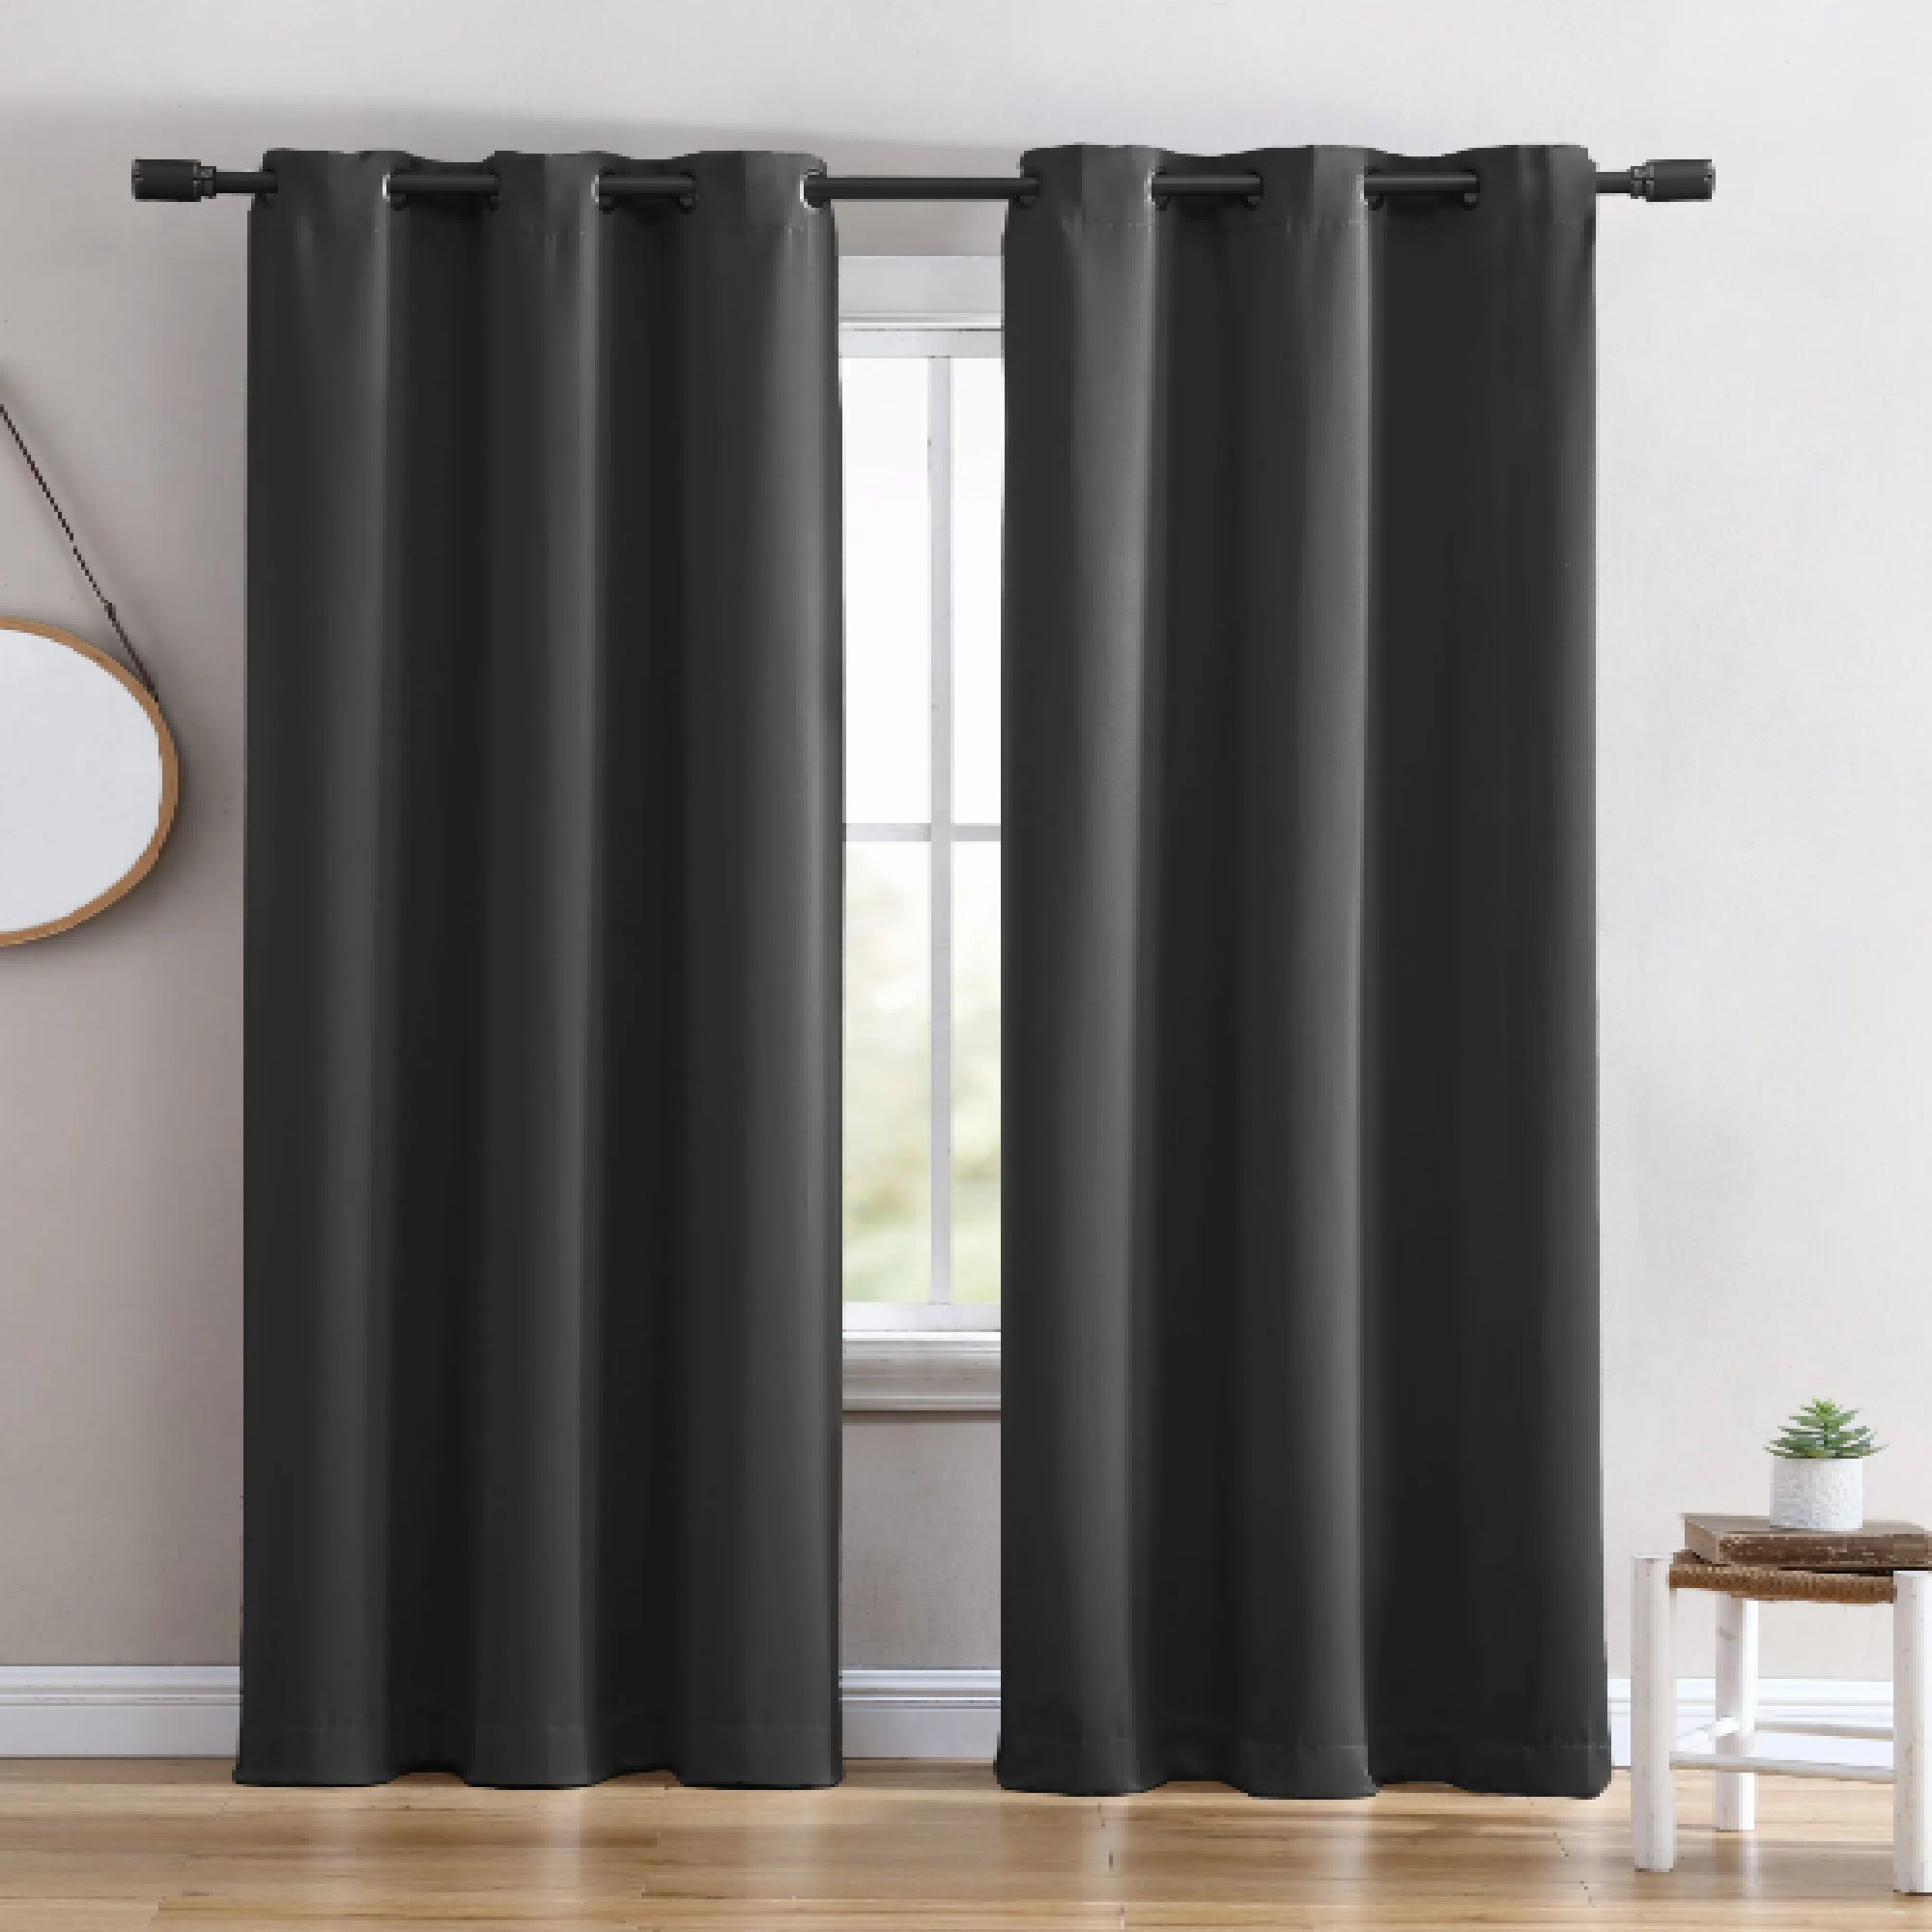 Ring Top Solid Blackout Thermal Grommet Single Curtain Panel Black